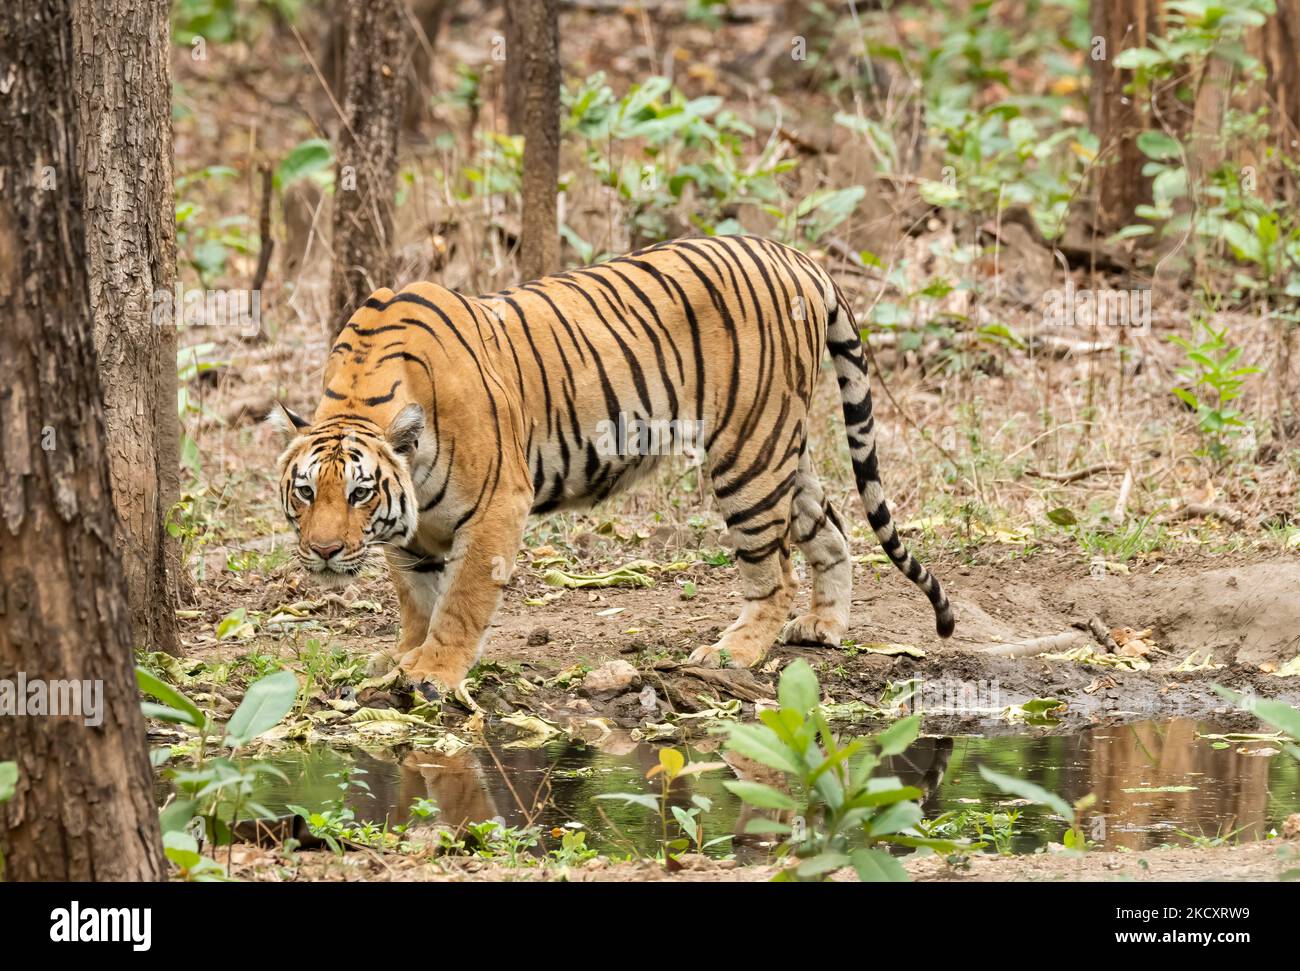 A female tigress walking inside her territory in Pench National Park during a wildlife safari Stock Photo